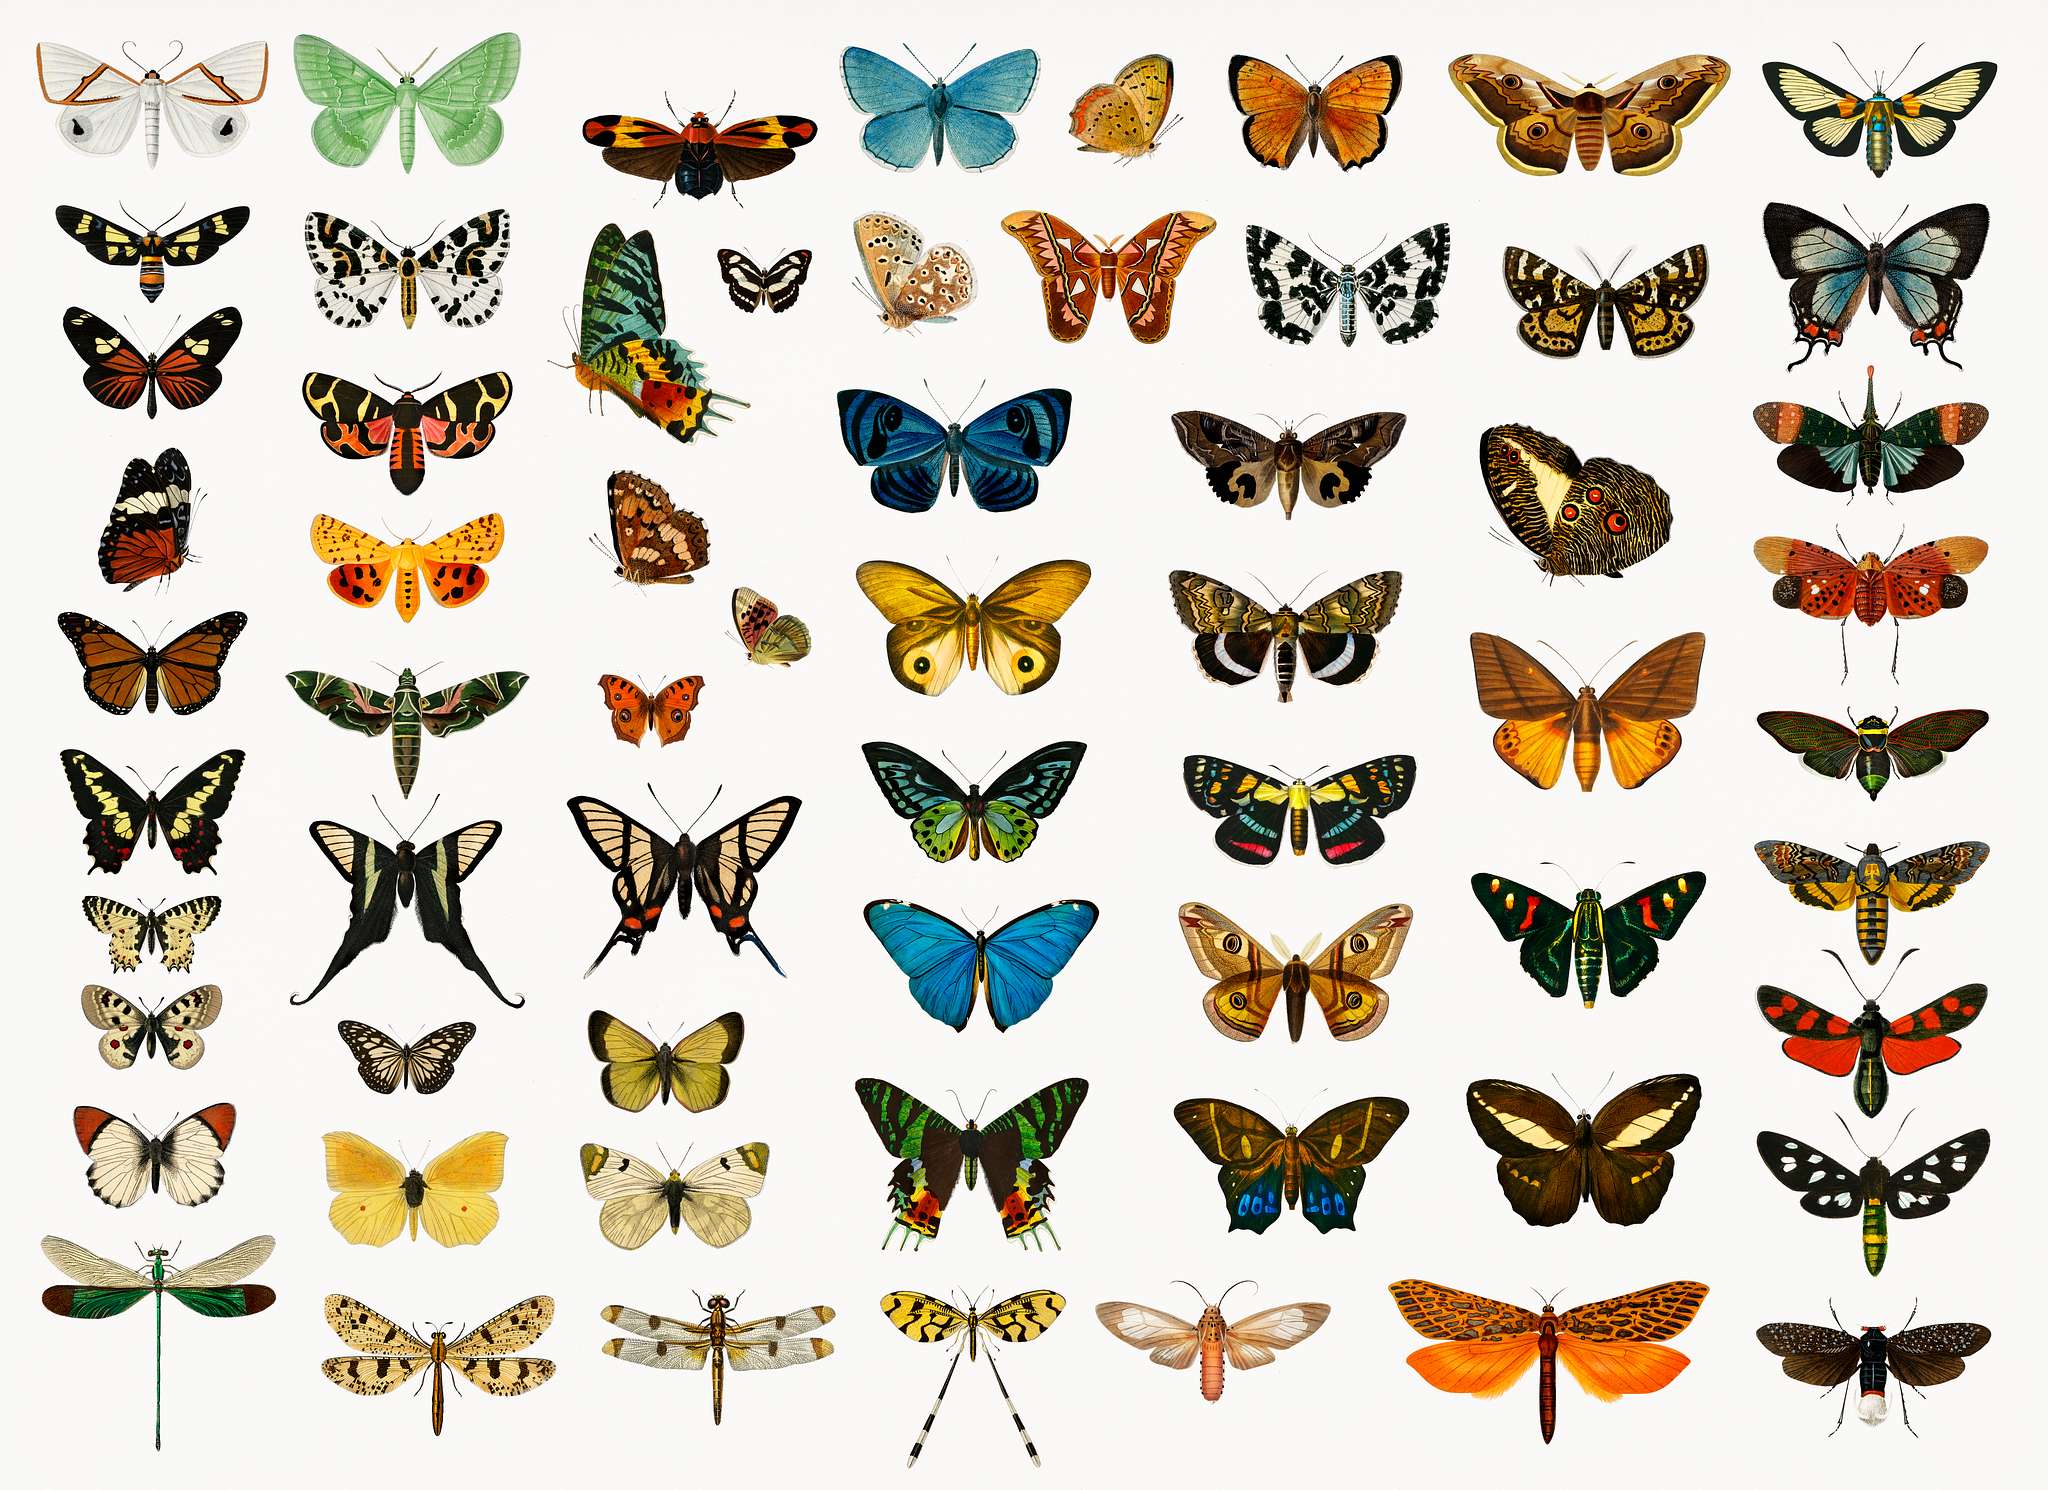 different-types-of-butterflies-and-moths-illustrated-by-charles